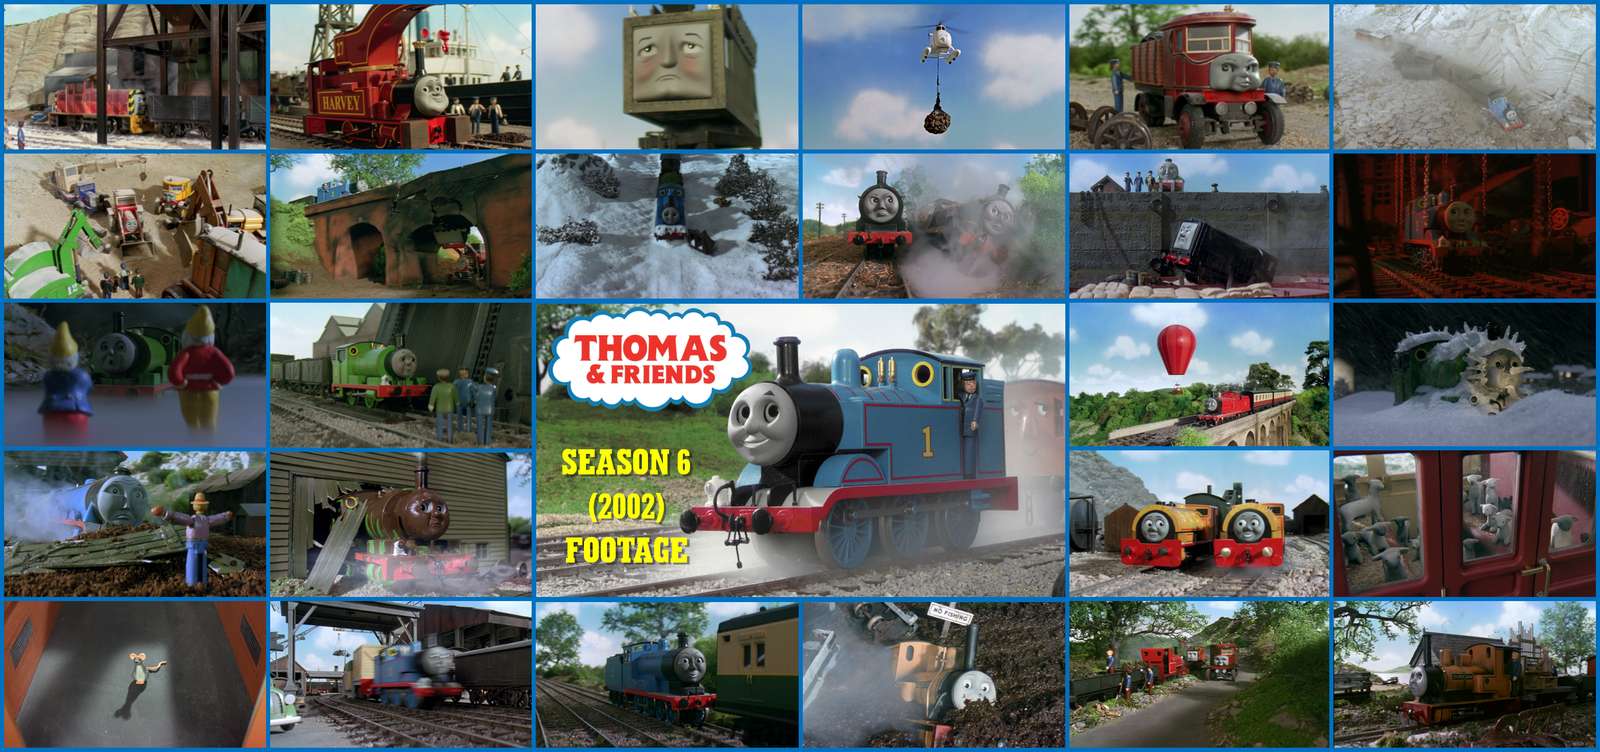 Thomas the Tank Engine Season 6 puzzle online from photo